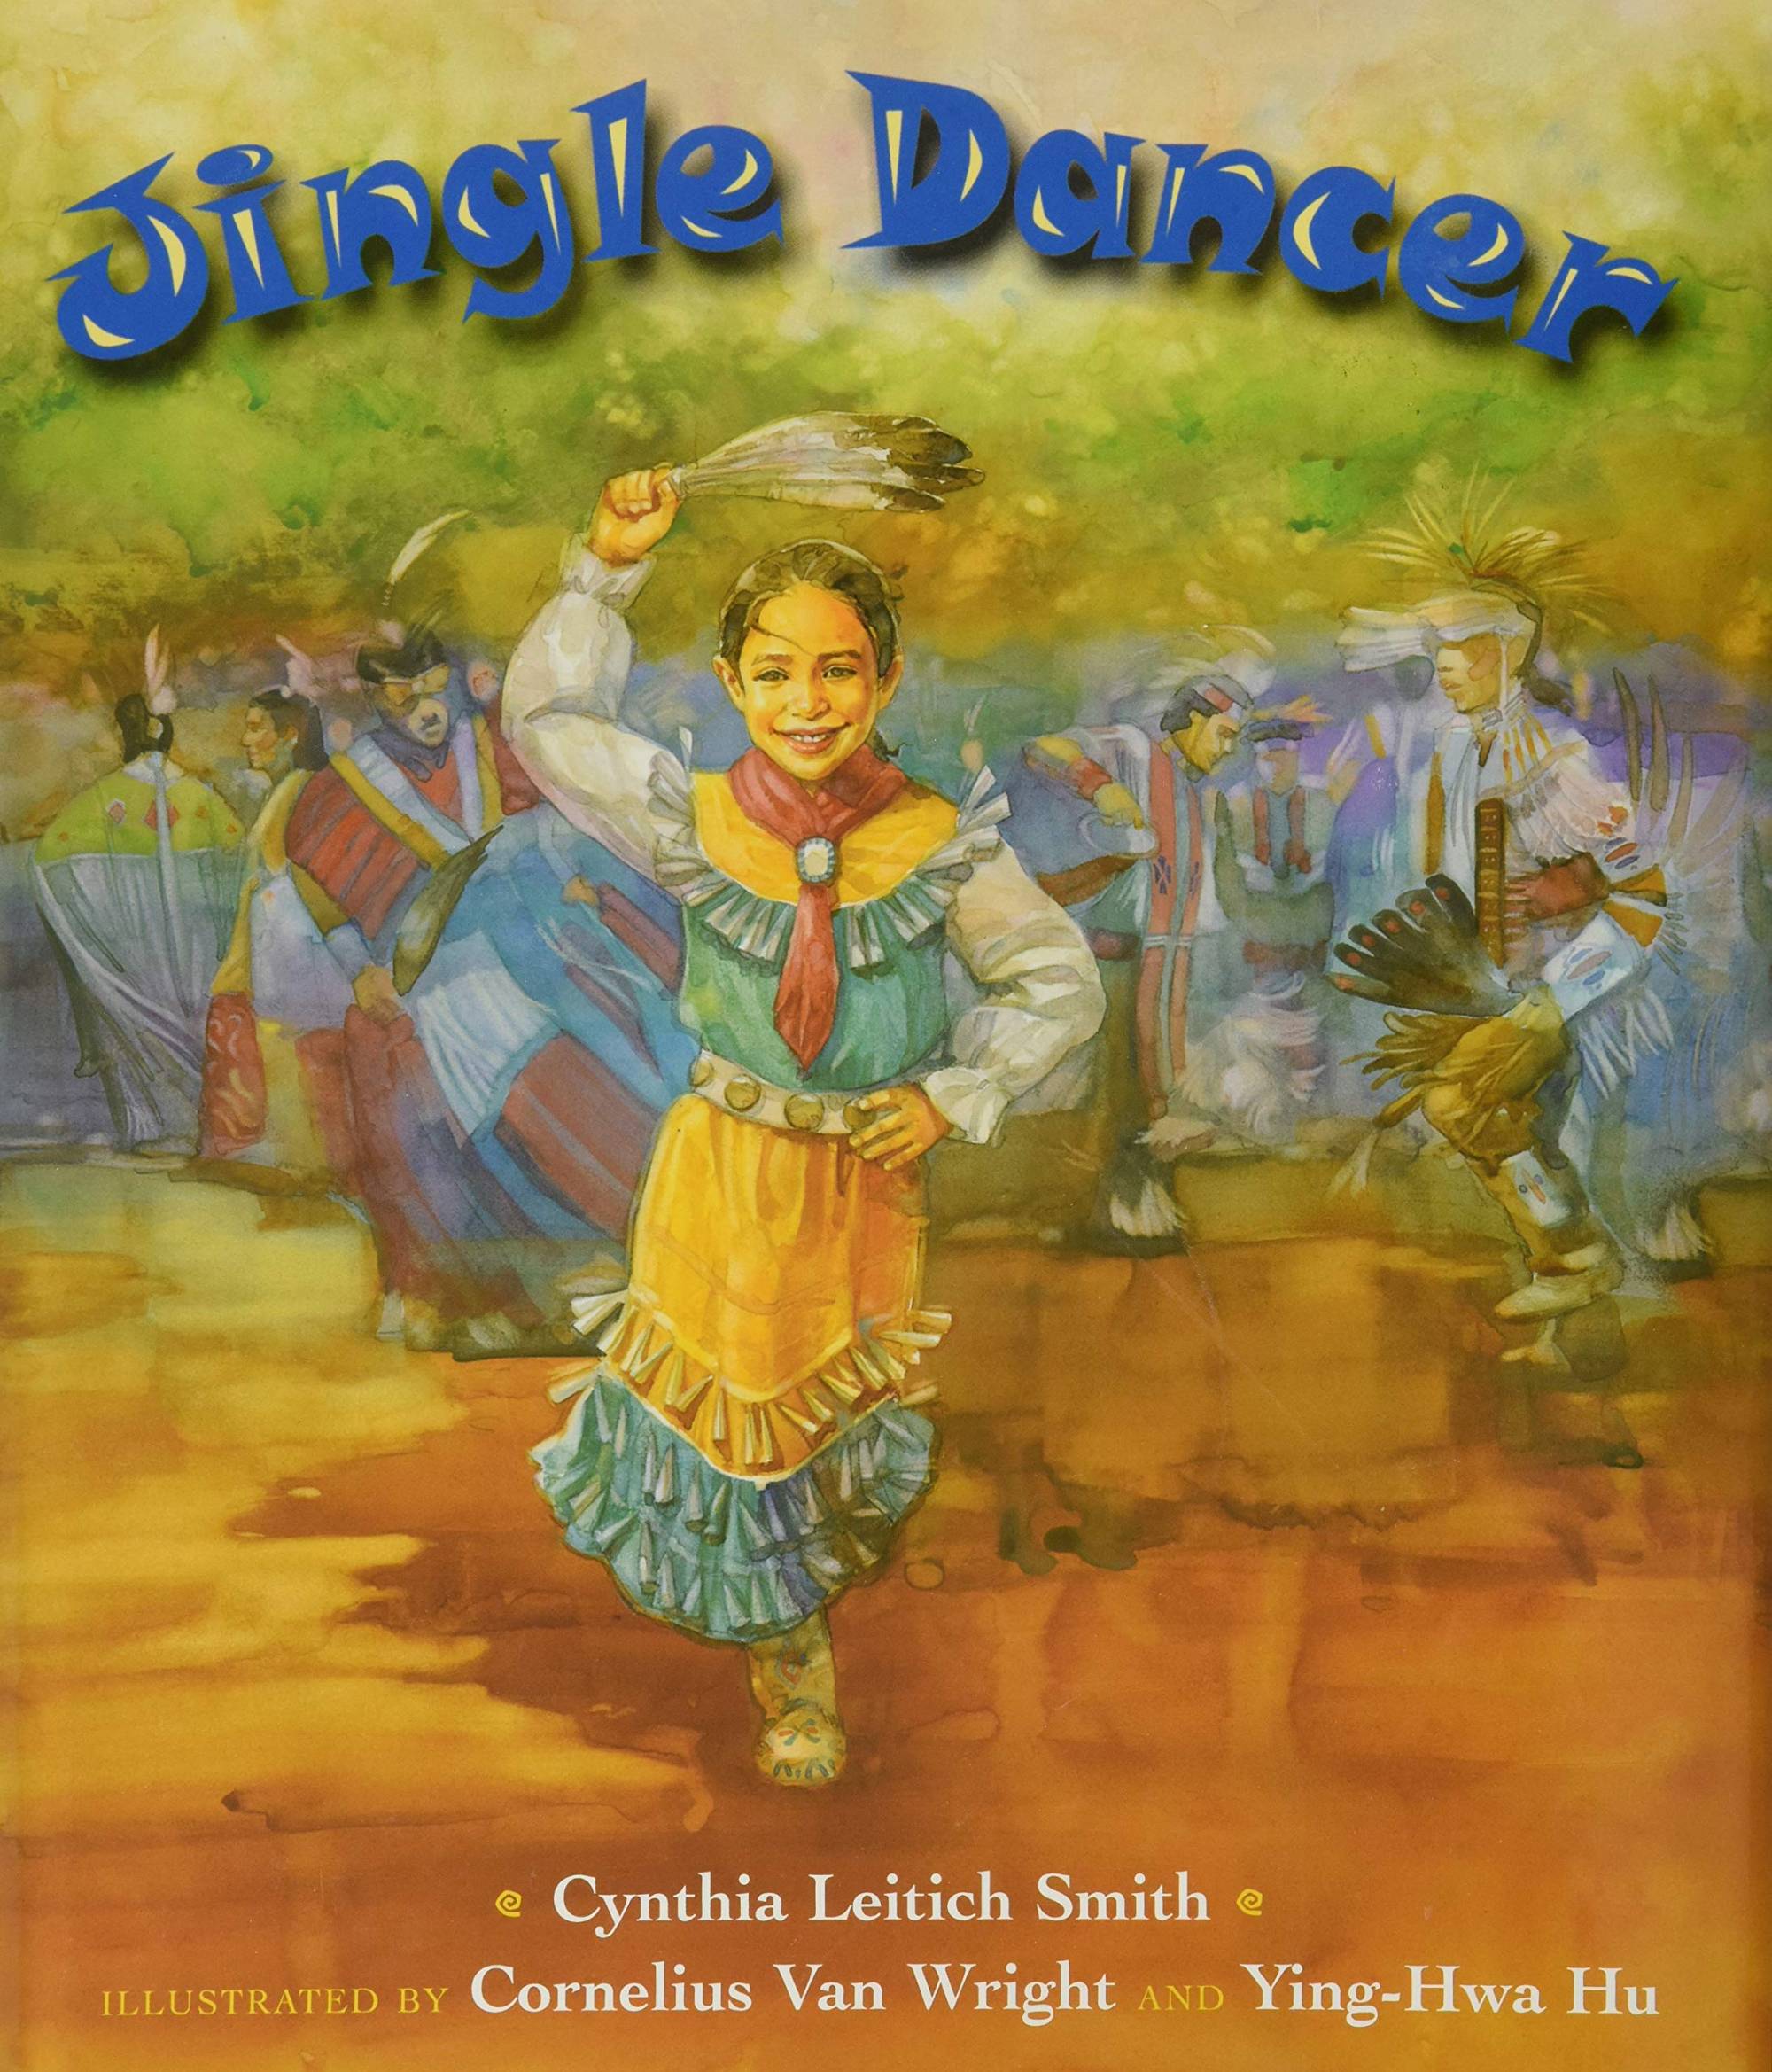 Book cover featuring an illustration of a girl in Native American dress dancing while holding a feather above her head